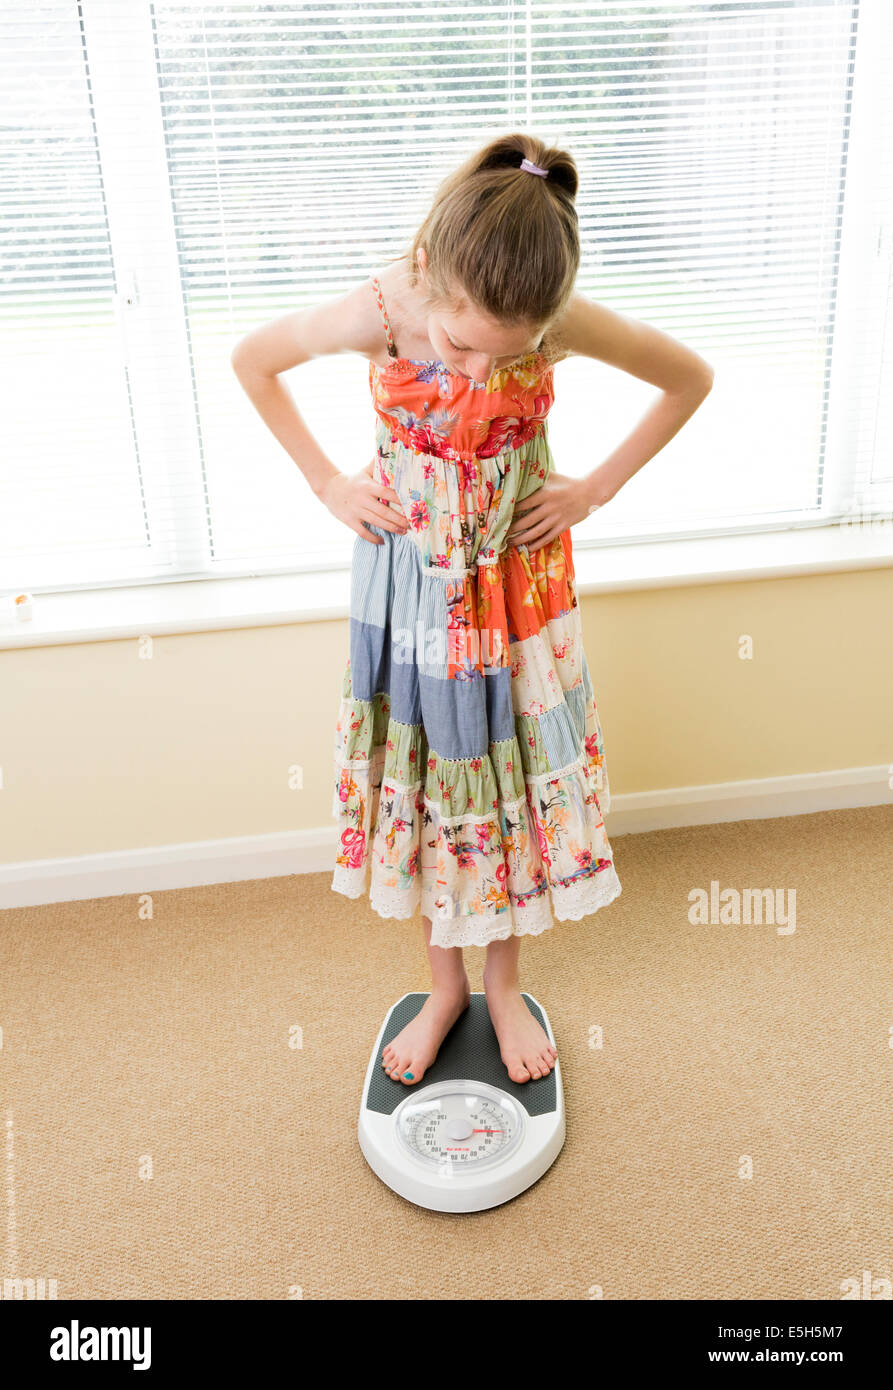 young girl checking her weight on scales Stock Photo